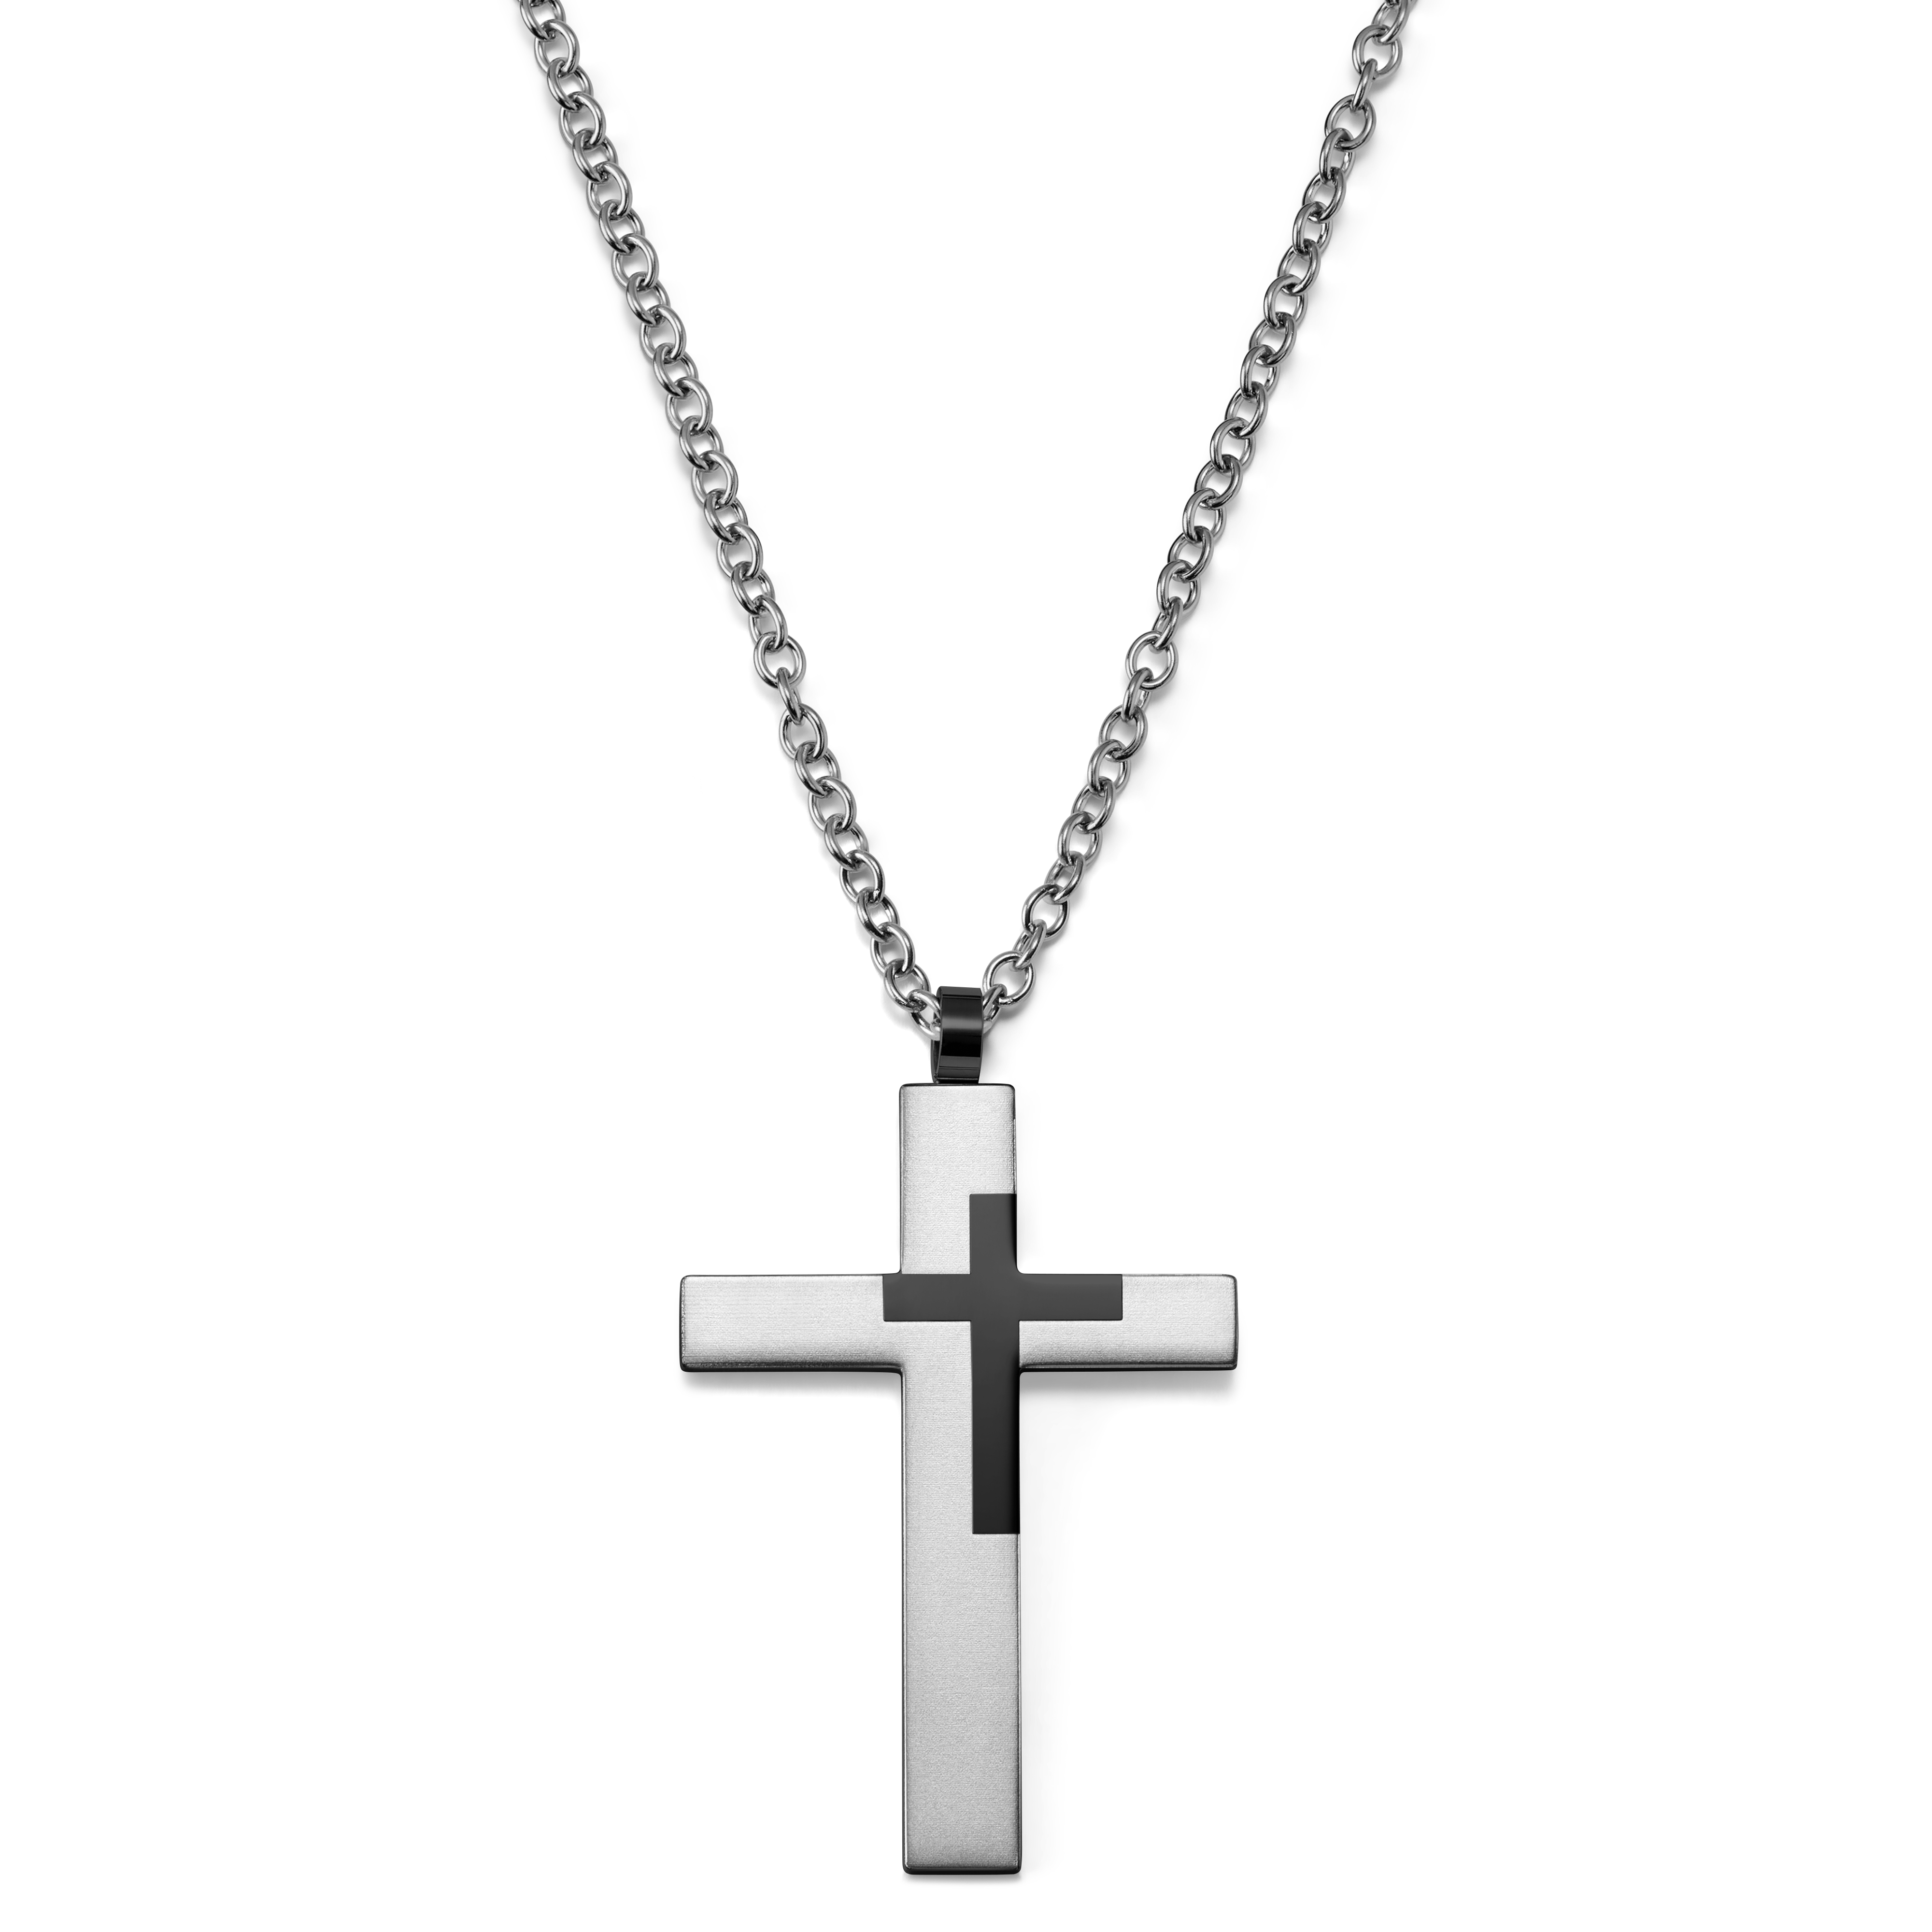 Rnivida Mens Sterling Silver Cross Pendant Necklace with 18 inch Chain,  Silver Cross Necklace for Men,Fine Jewelry for Men | Amazon.com